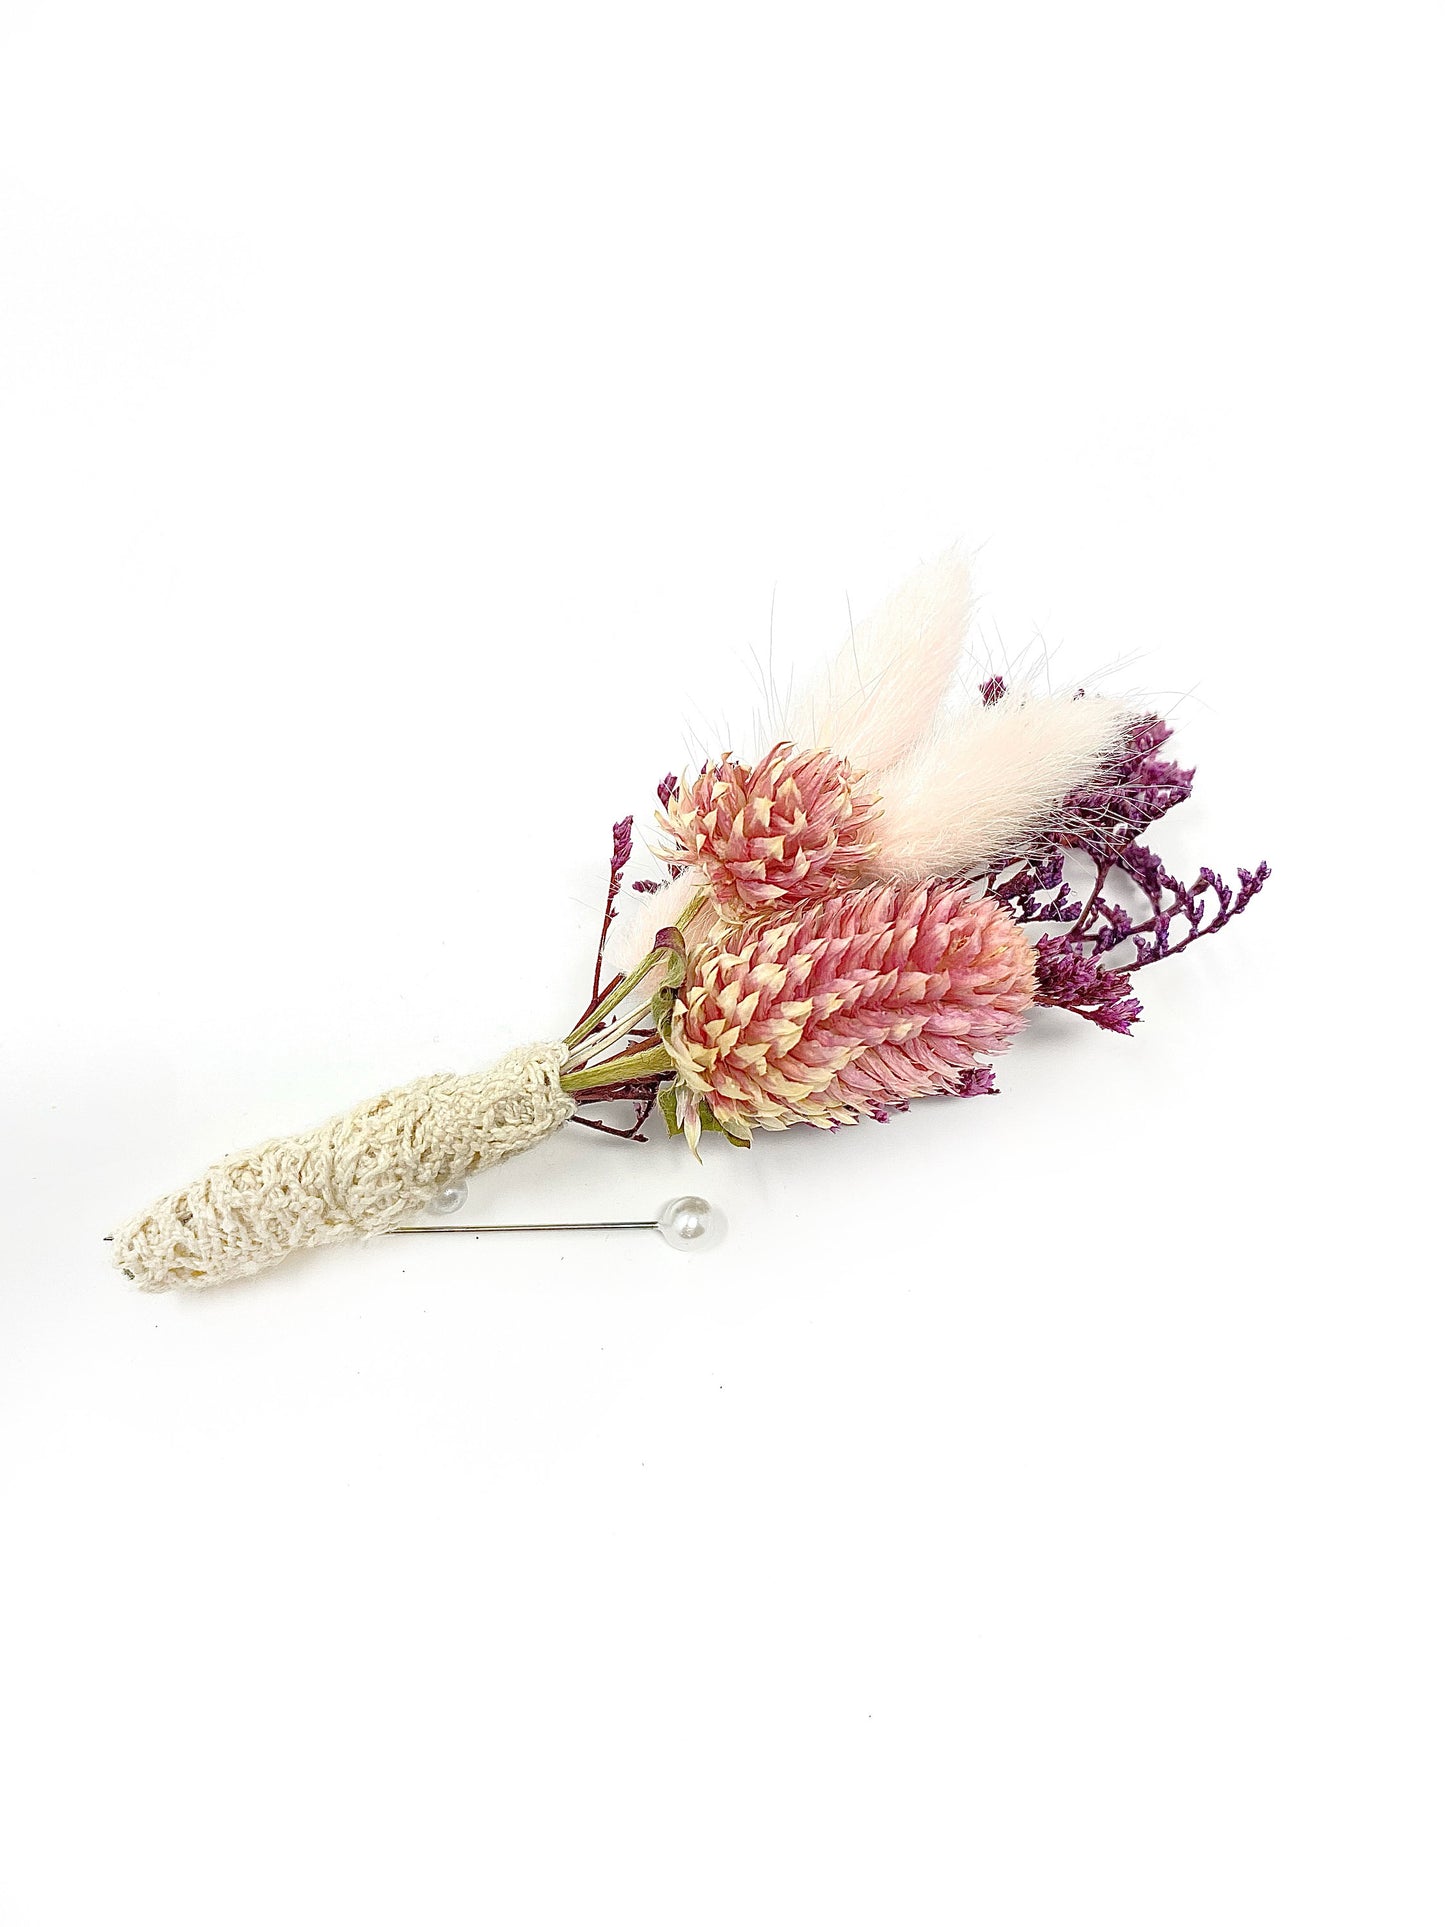 Boutonniere, Wedding Accessories, Dried Flowers, Preserved Floral, Bridal, Decor, Caspia, Bunny Tails, Pink and Purple